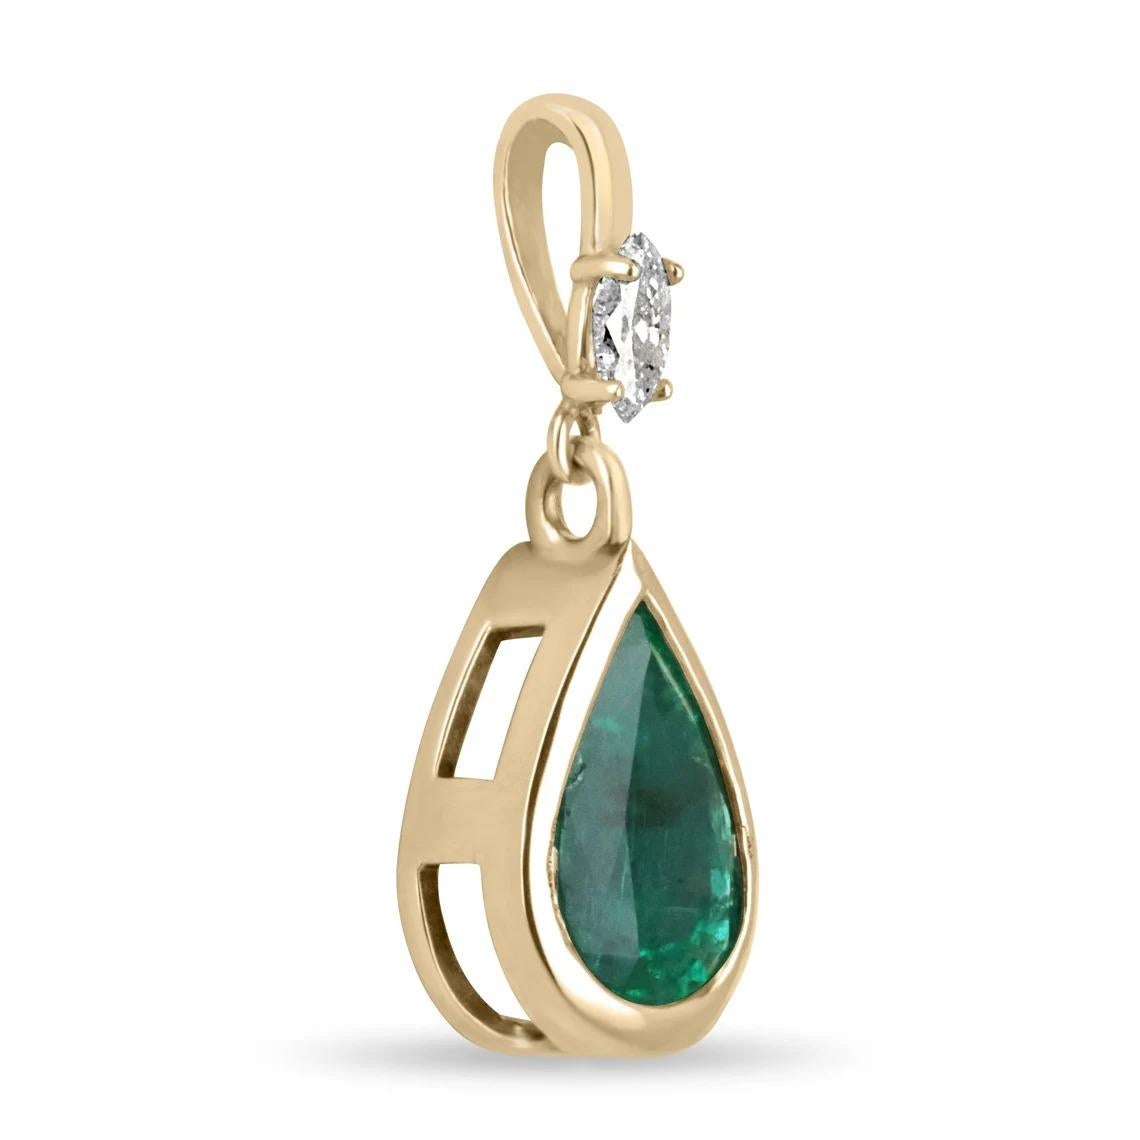 A lovely emerald and diamond necklace. The center of attention is the stunning teardrop/pear-cut emerald that showcases a ravishing dark green color with very good clarity and luster. Bezel set and hung by a vertical set marquise cut diamond that